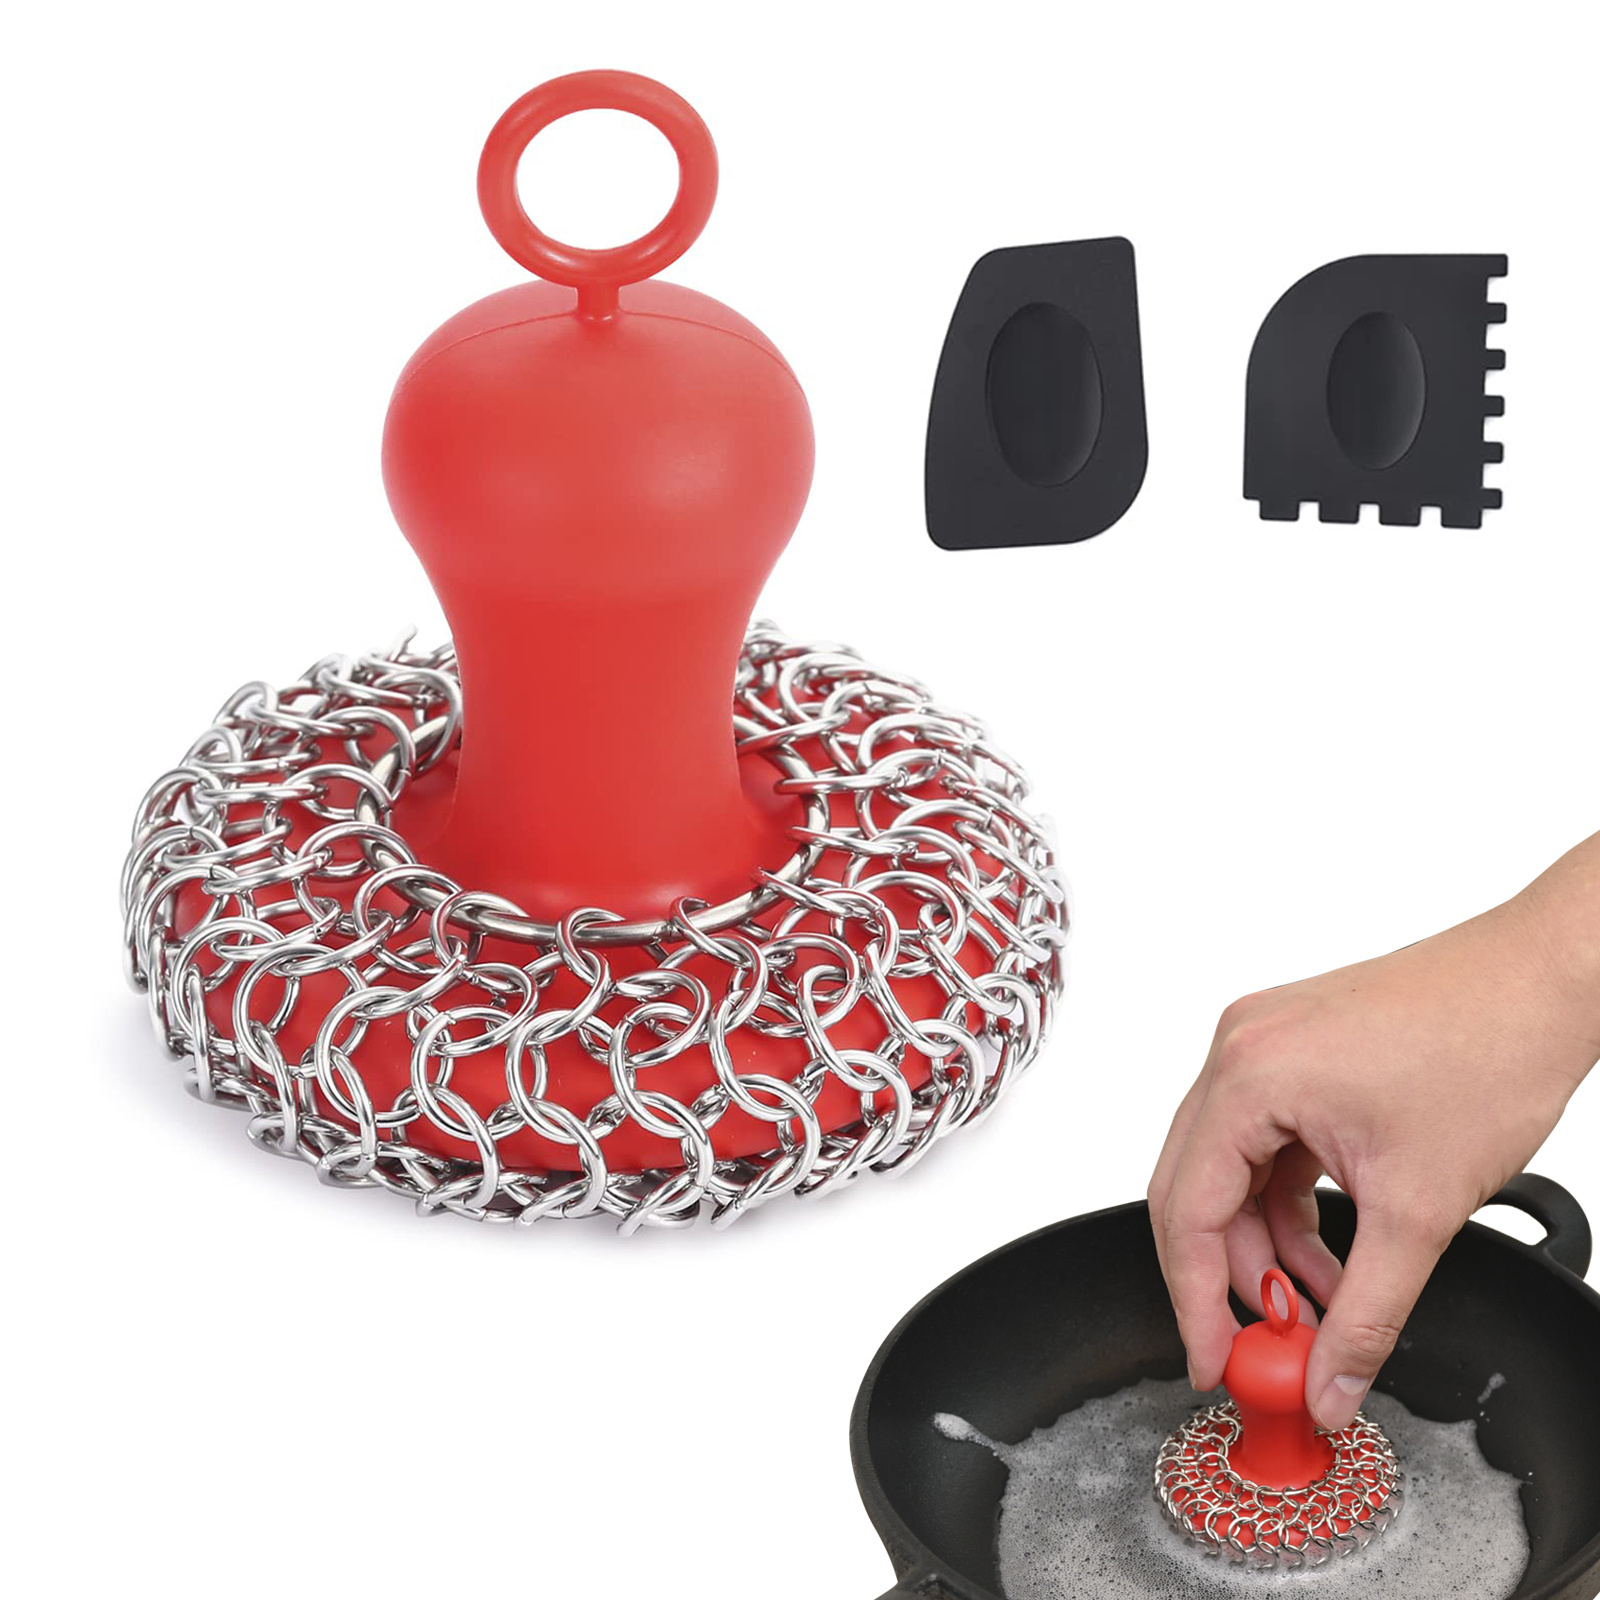 Steel Chainmail Scrubber Reusable Cast Iron Pan Cleaner for Zero Waste  Cleaning Handmade From Stainless Steel Chain Mail 